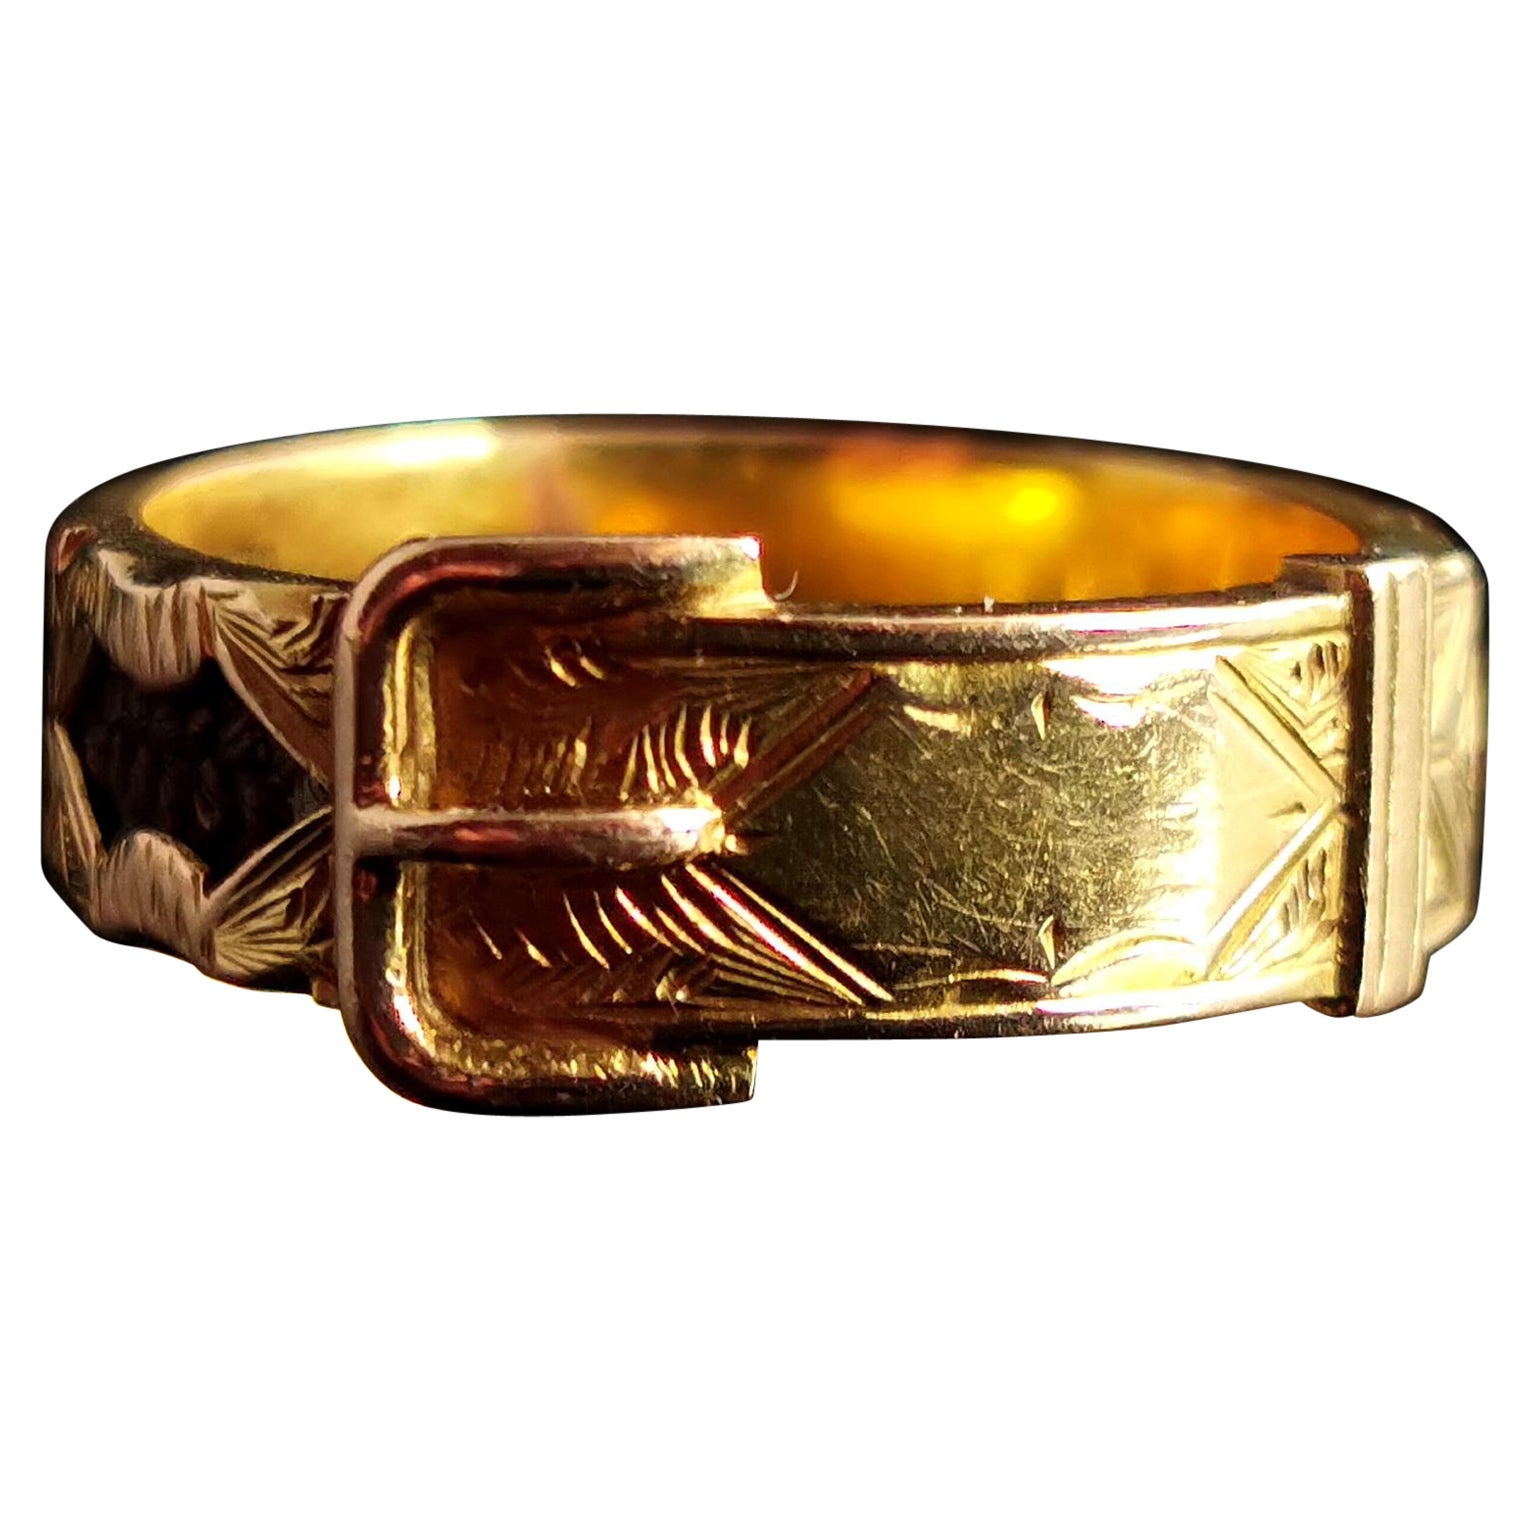 Antique Victorian Buckle Mourning Ring, 15k Yellow Gold, Hairwork